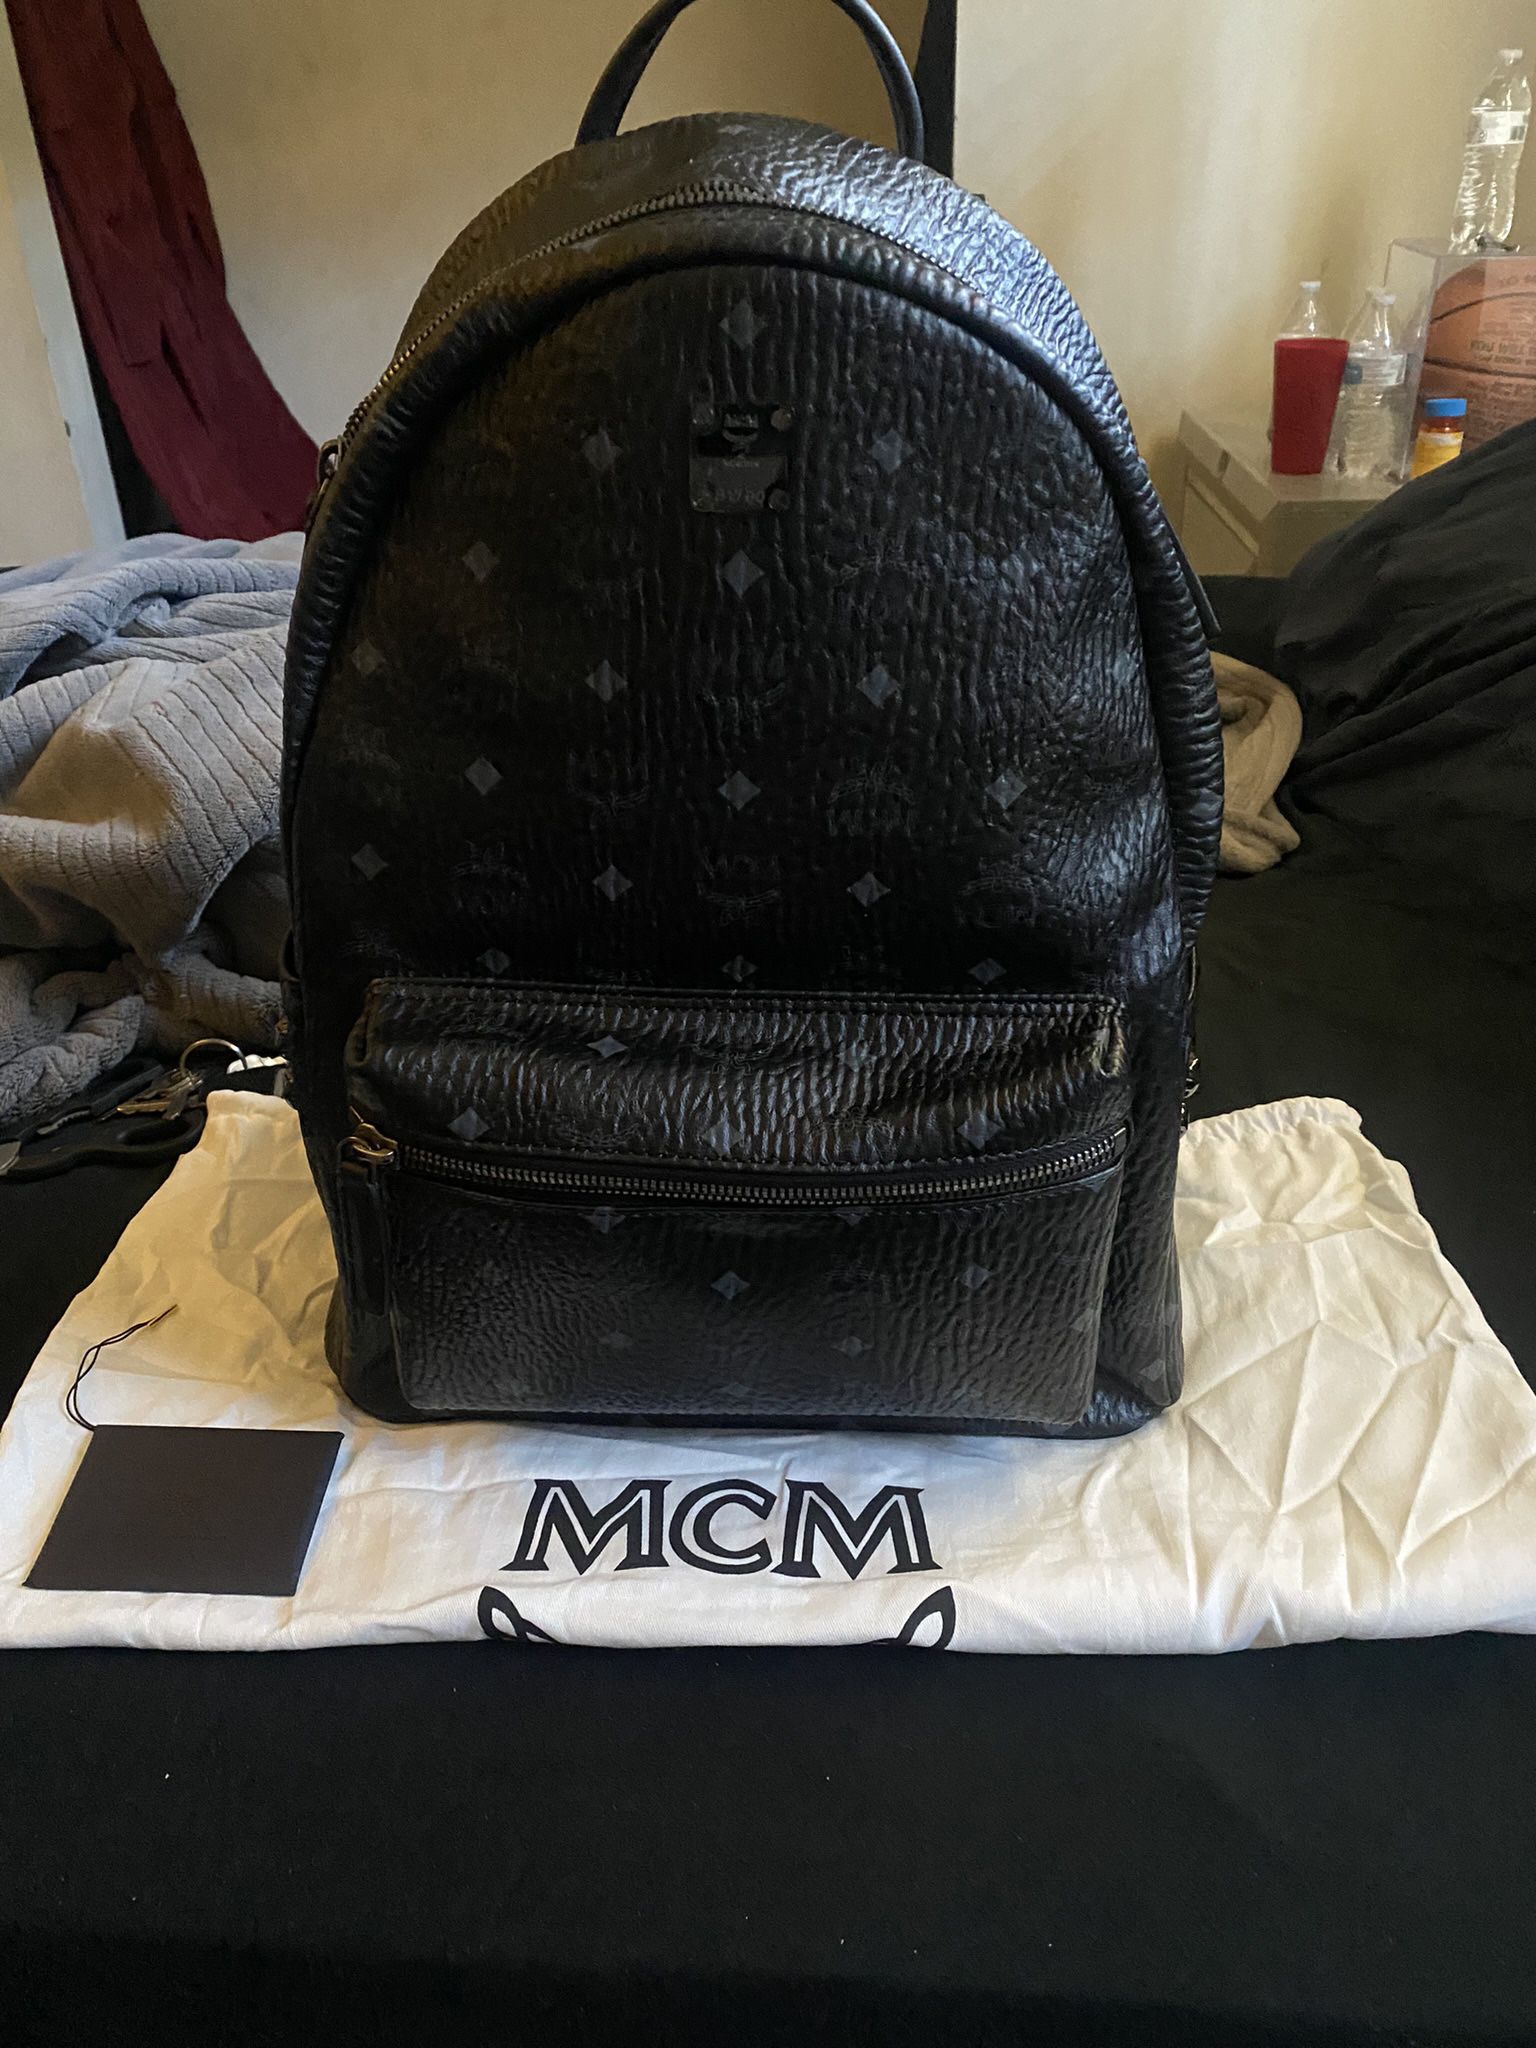 Mcm Backpack for Sale in Sacramento, CA - OfferUp